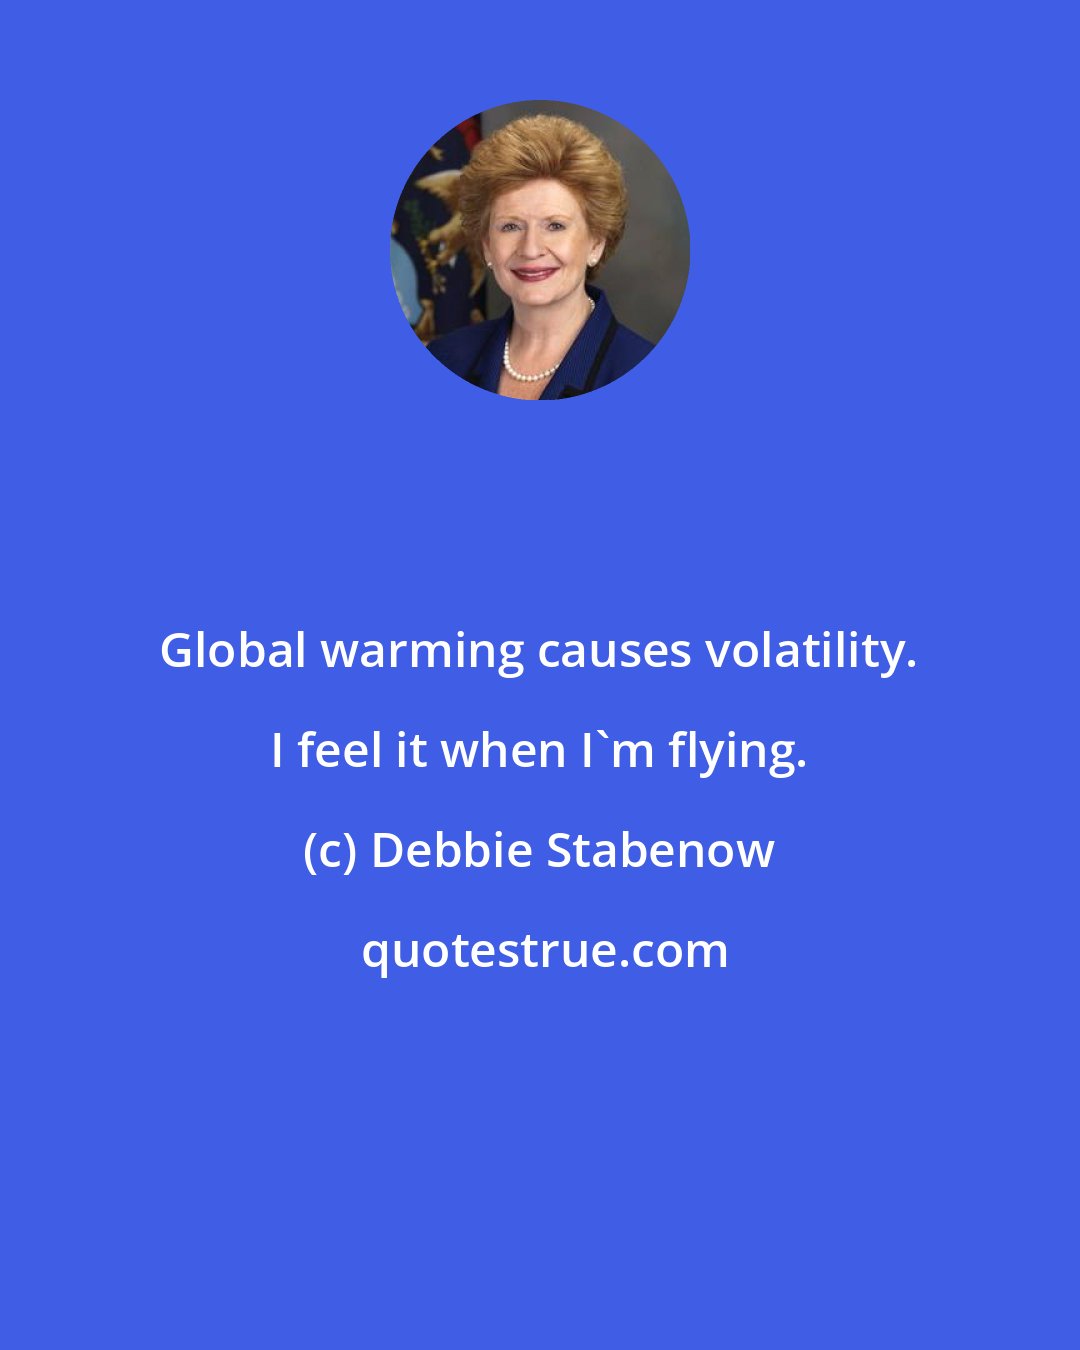 Debbie Stabenow: Global warming causes volatility. I feel it when I'm flying.